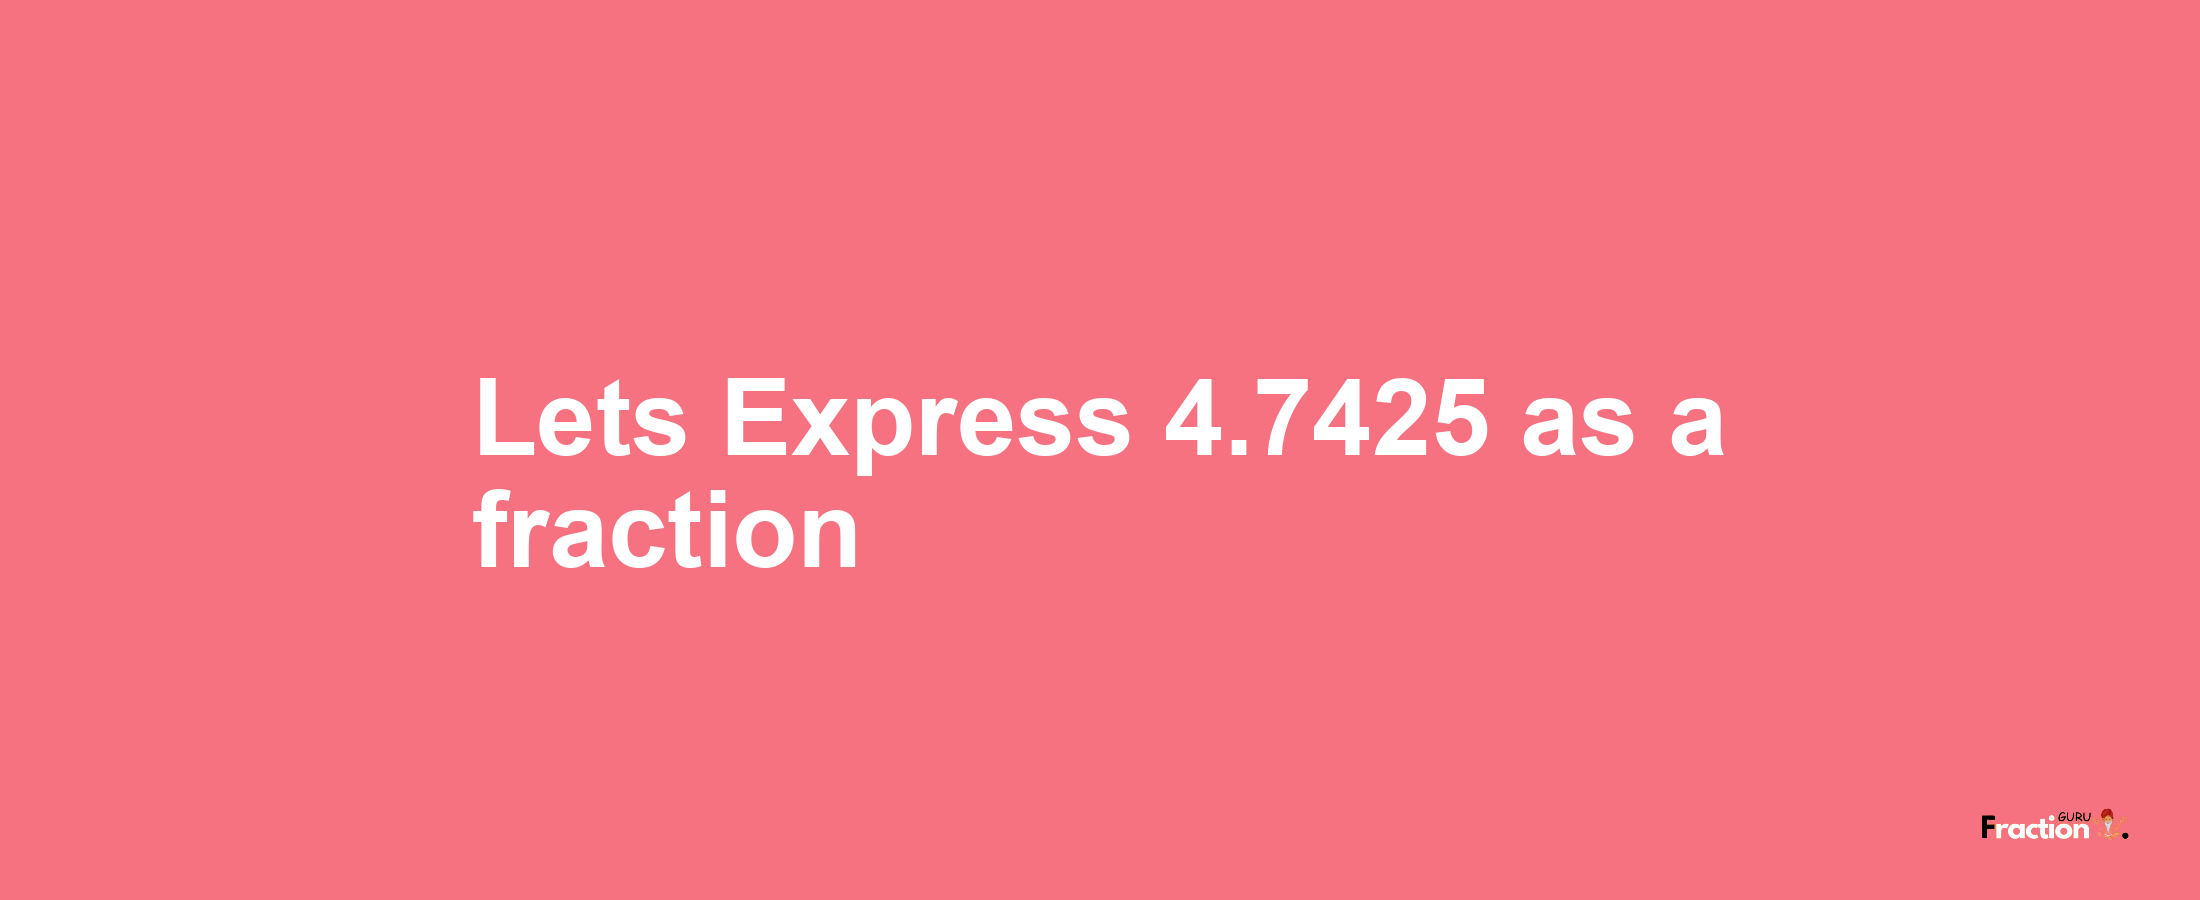 Lets Express 4.7425 as afraction